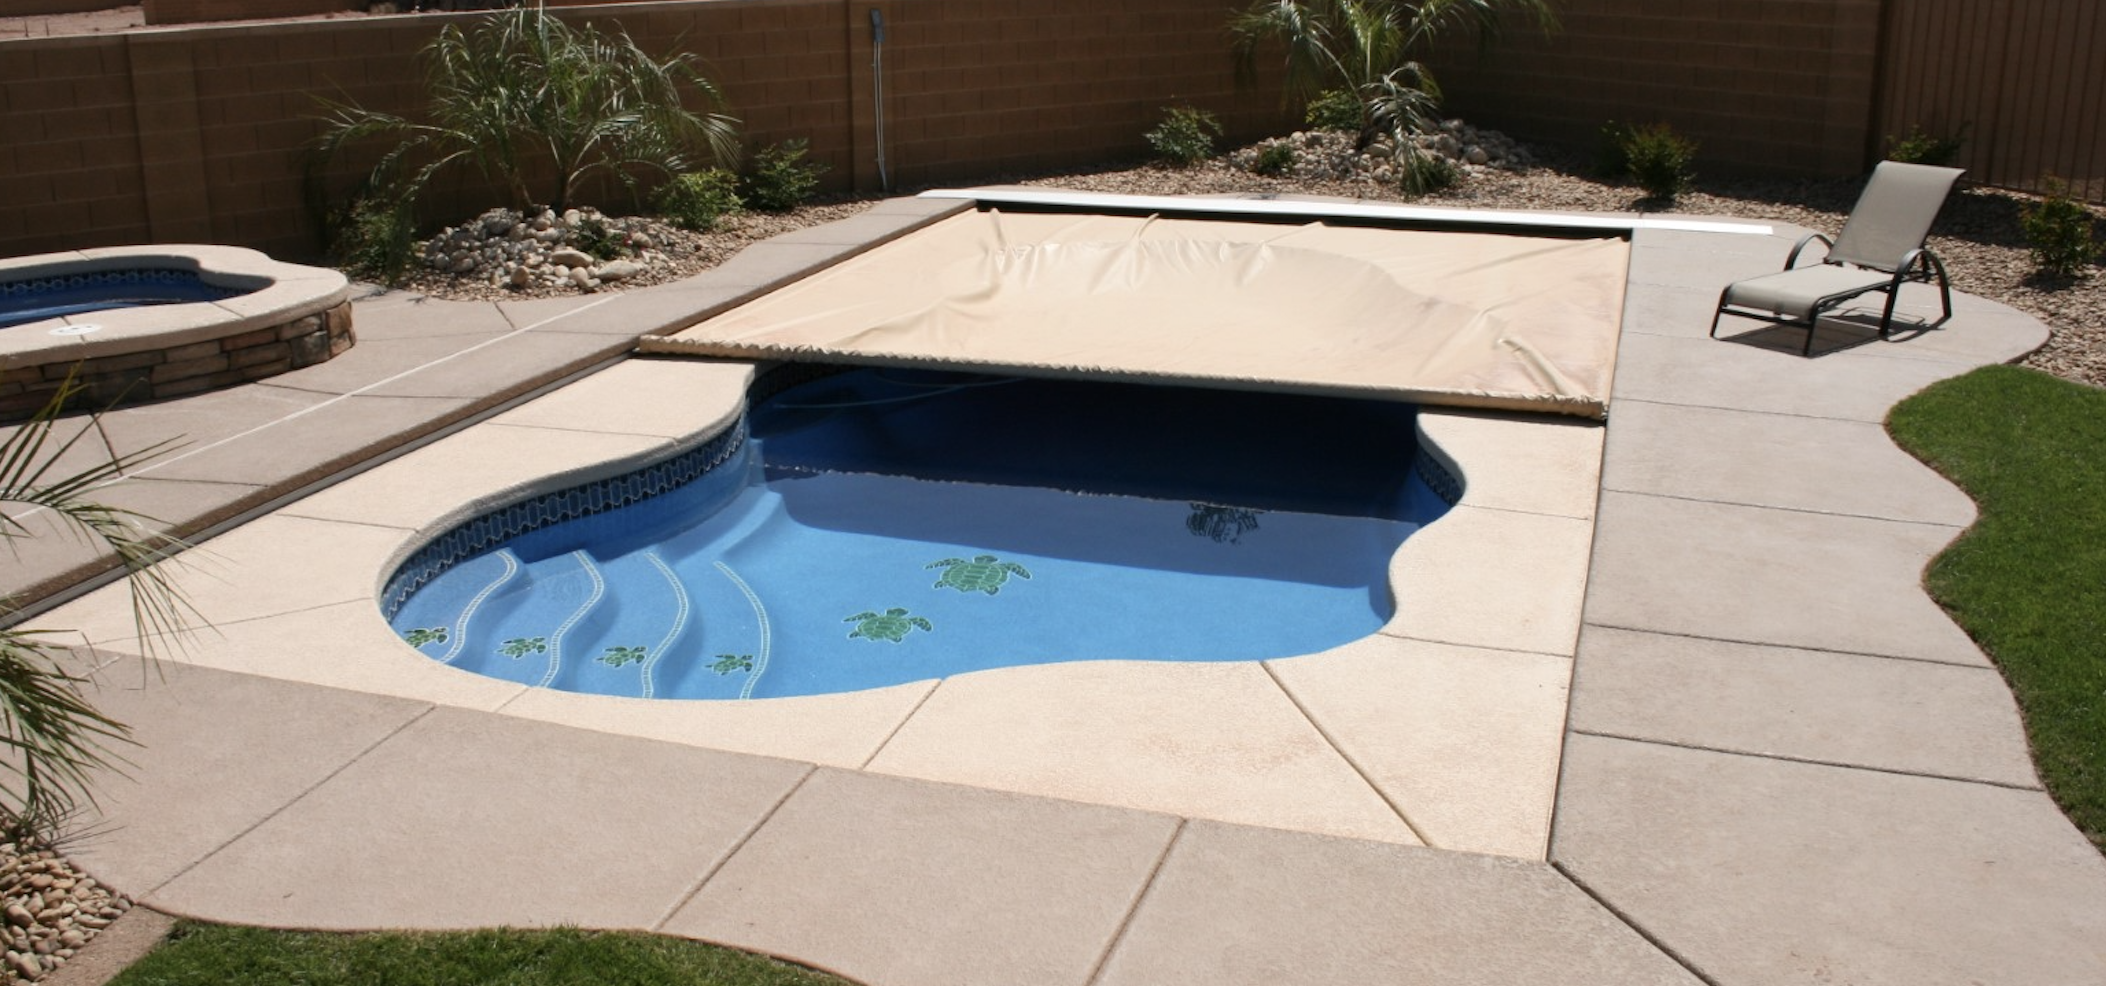 https://blog.orendatech.com/hs-fs/hubfs/latham%20pool%20cover,%20automatic%20pool%20cover,%20pool%20safety%20cover.png?width=2106&name=latham%20pool%20cover,%20automatic%20pool%20cover,%20pool%20safety%20cover.png